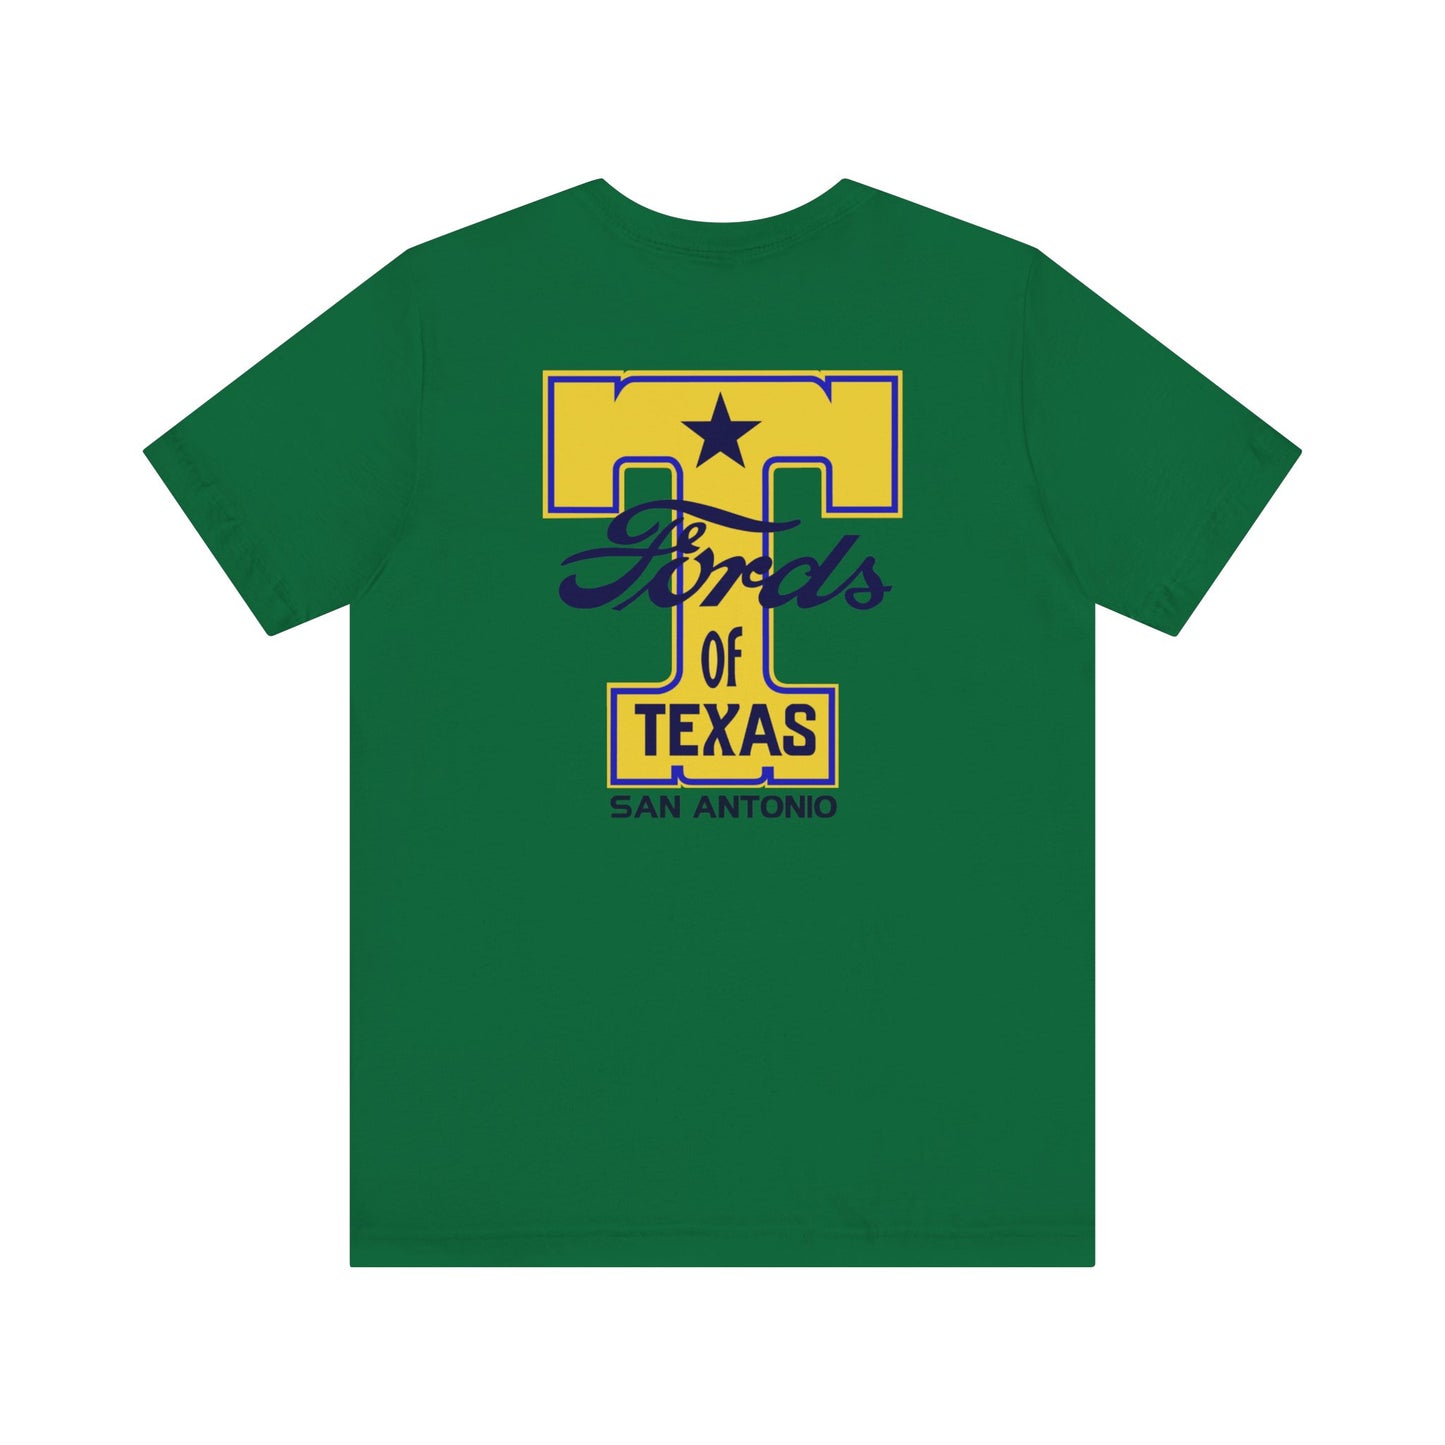 T Fords of Texas (front and back print) Unisex Jersey Short Sleeve Tee